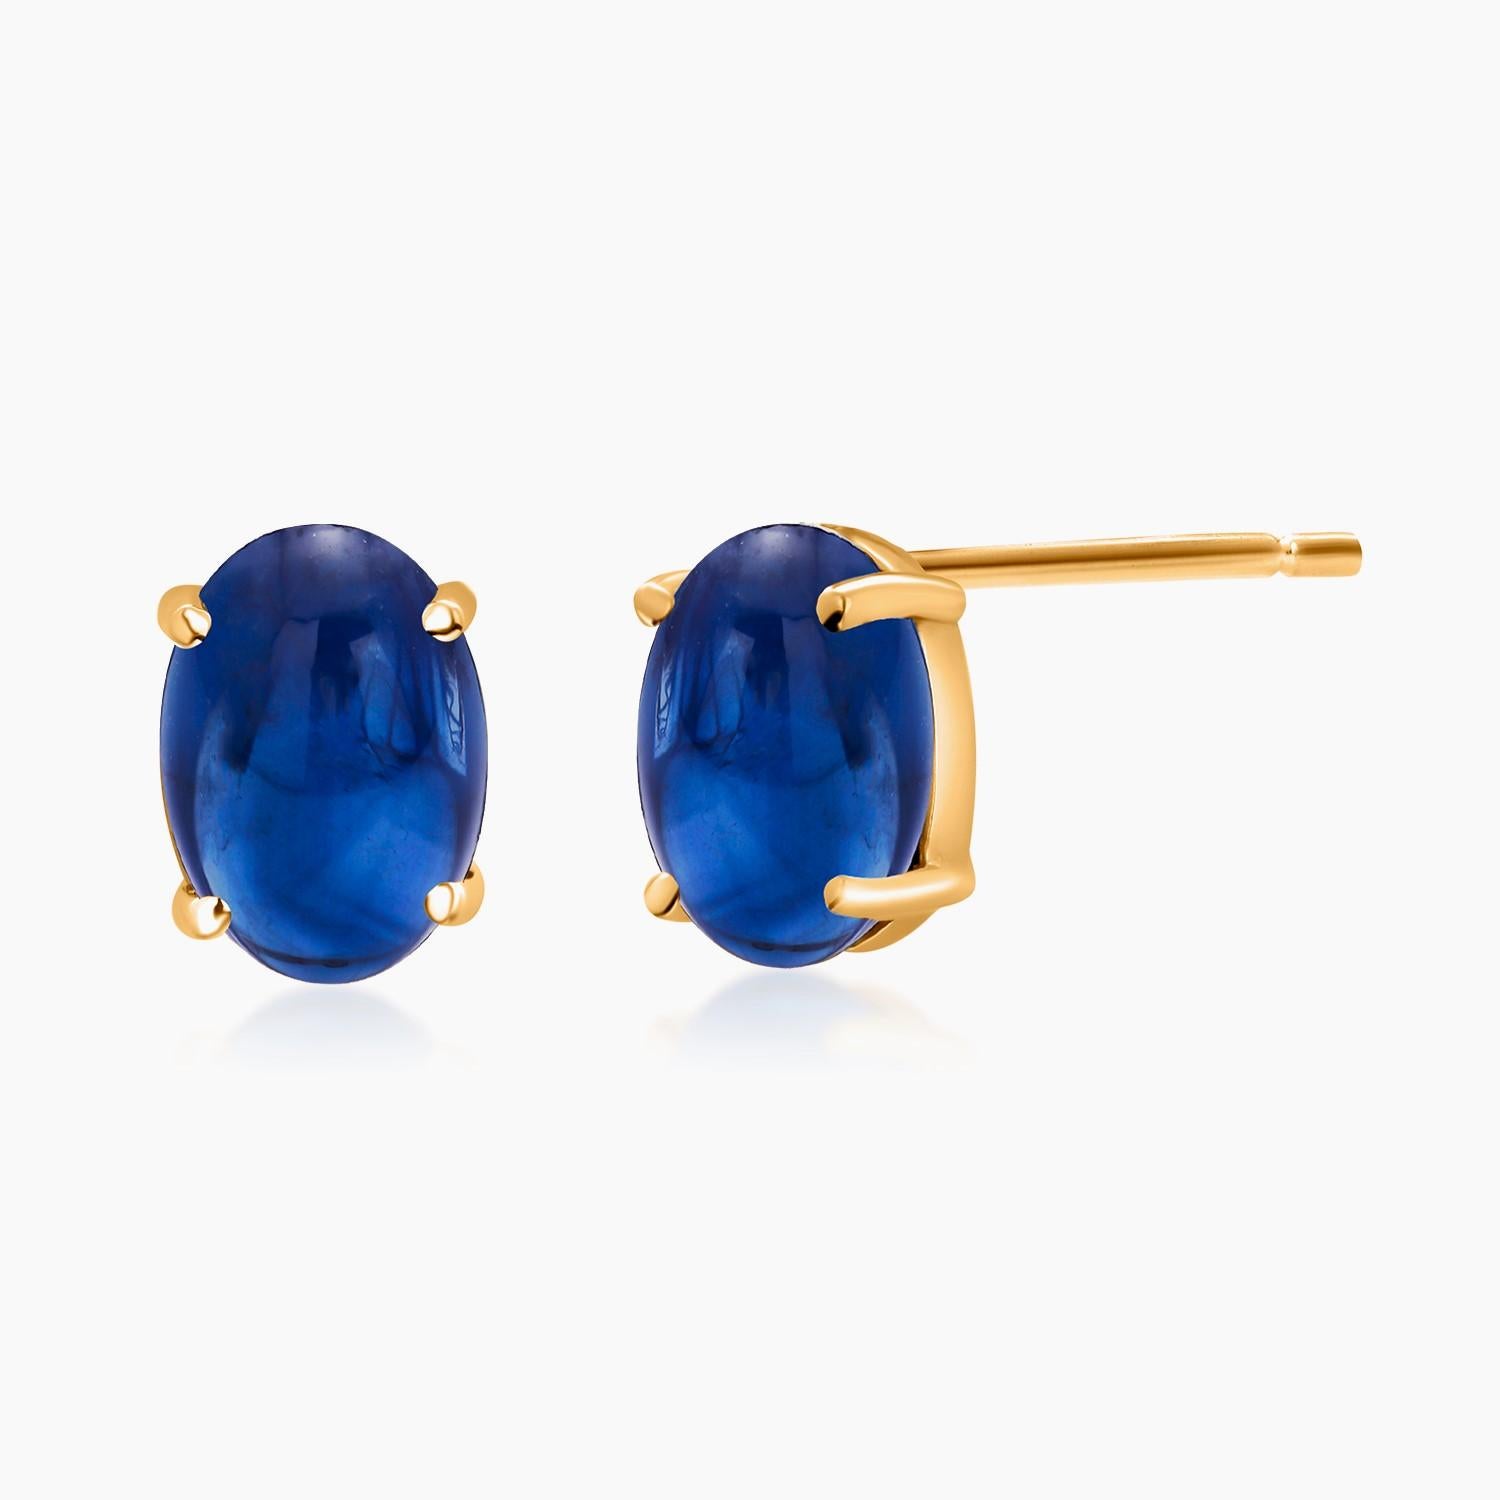 Matched Cabochon Sapphire 3.56 Carat 0.31 X 0.23 Inch Yellow Gold Stud Earrings For Sale 2